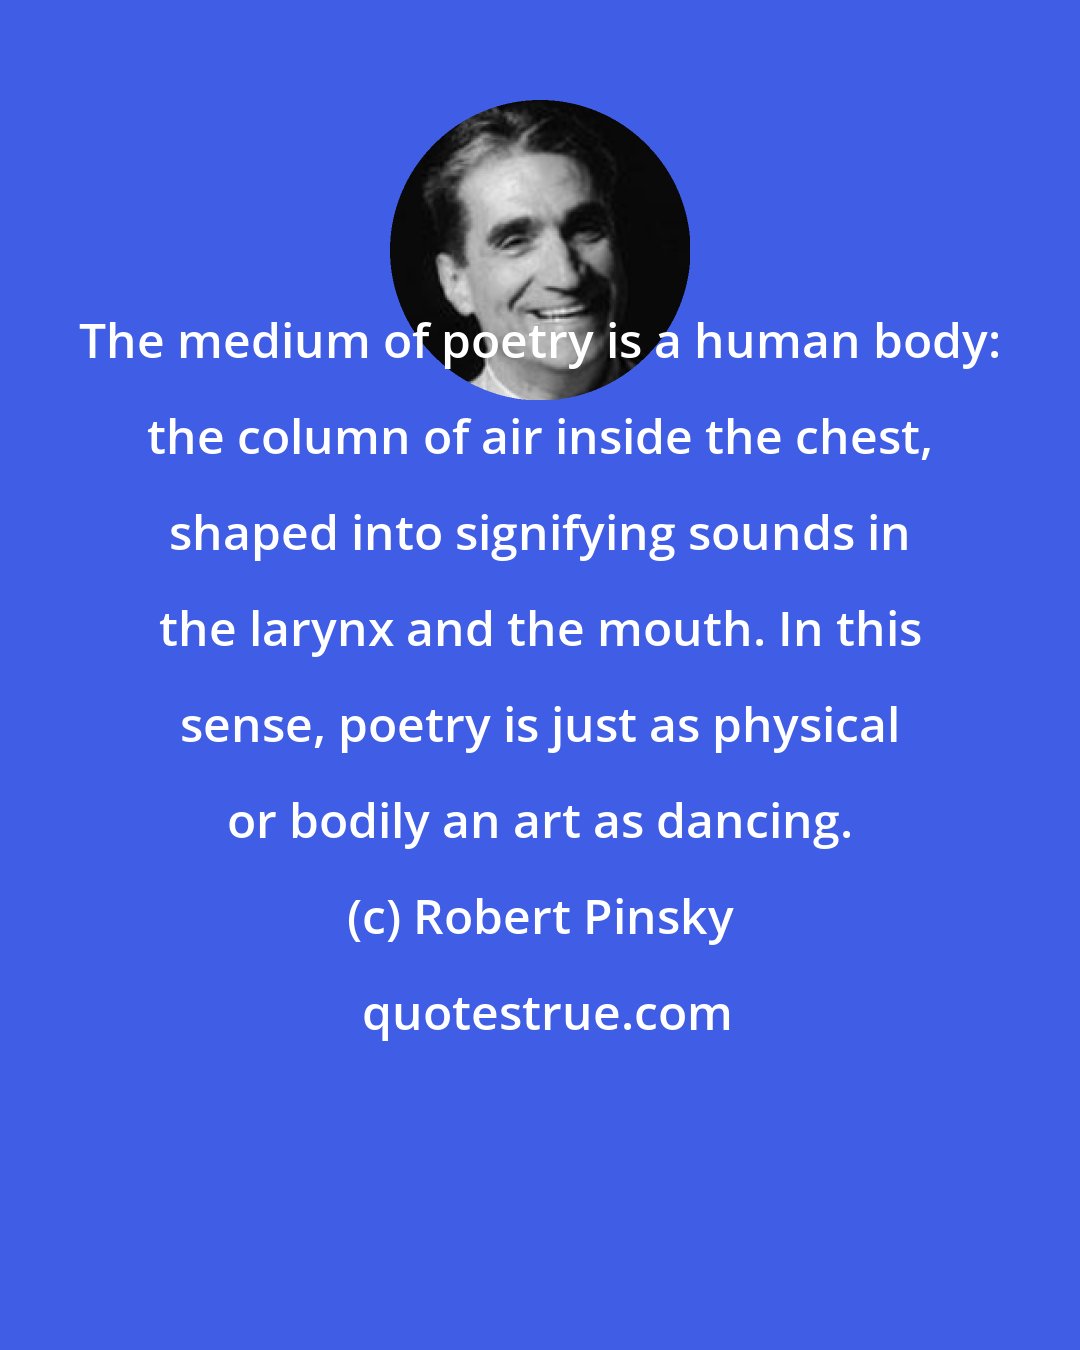 Robert Pinsky: The medium of poetry is a human body: the column of air inside the chest, shaped into signifying sounds in the larynx and the mouth. In this sense, poetry is just as physical or bodily an art as dancing.